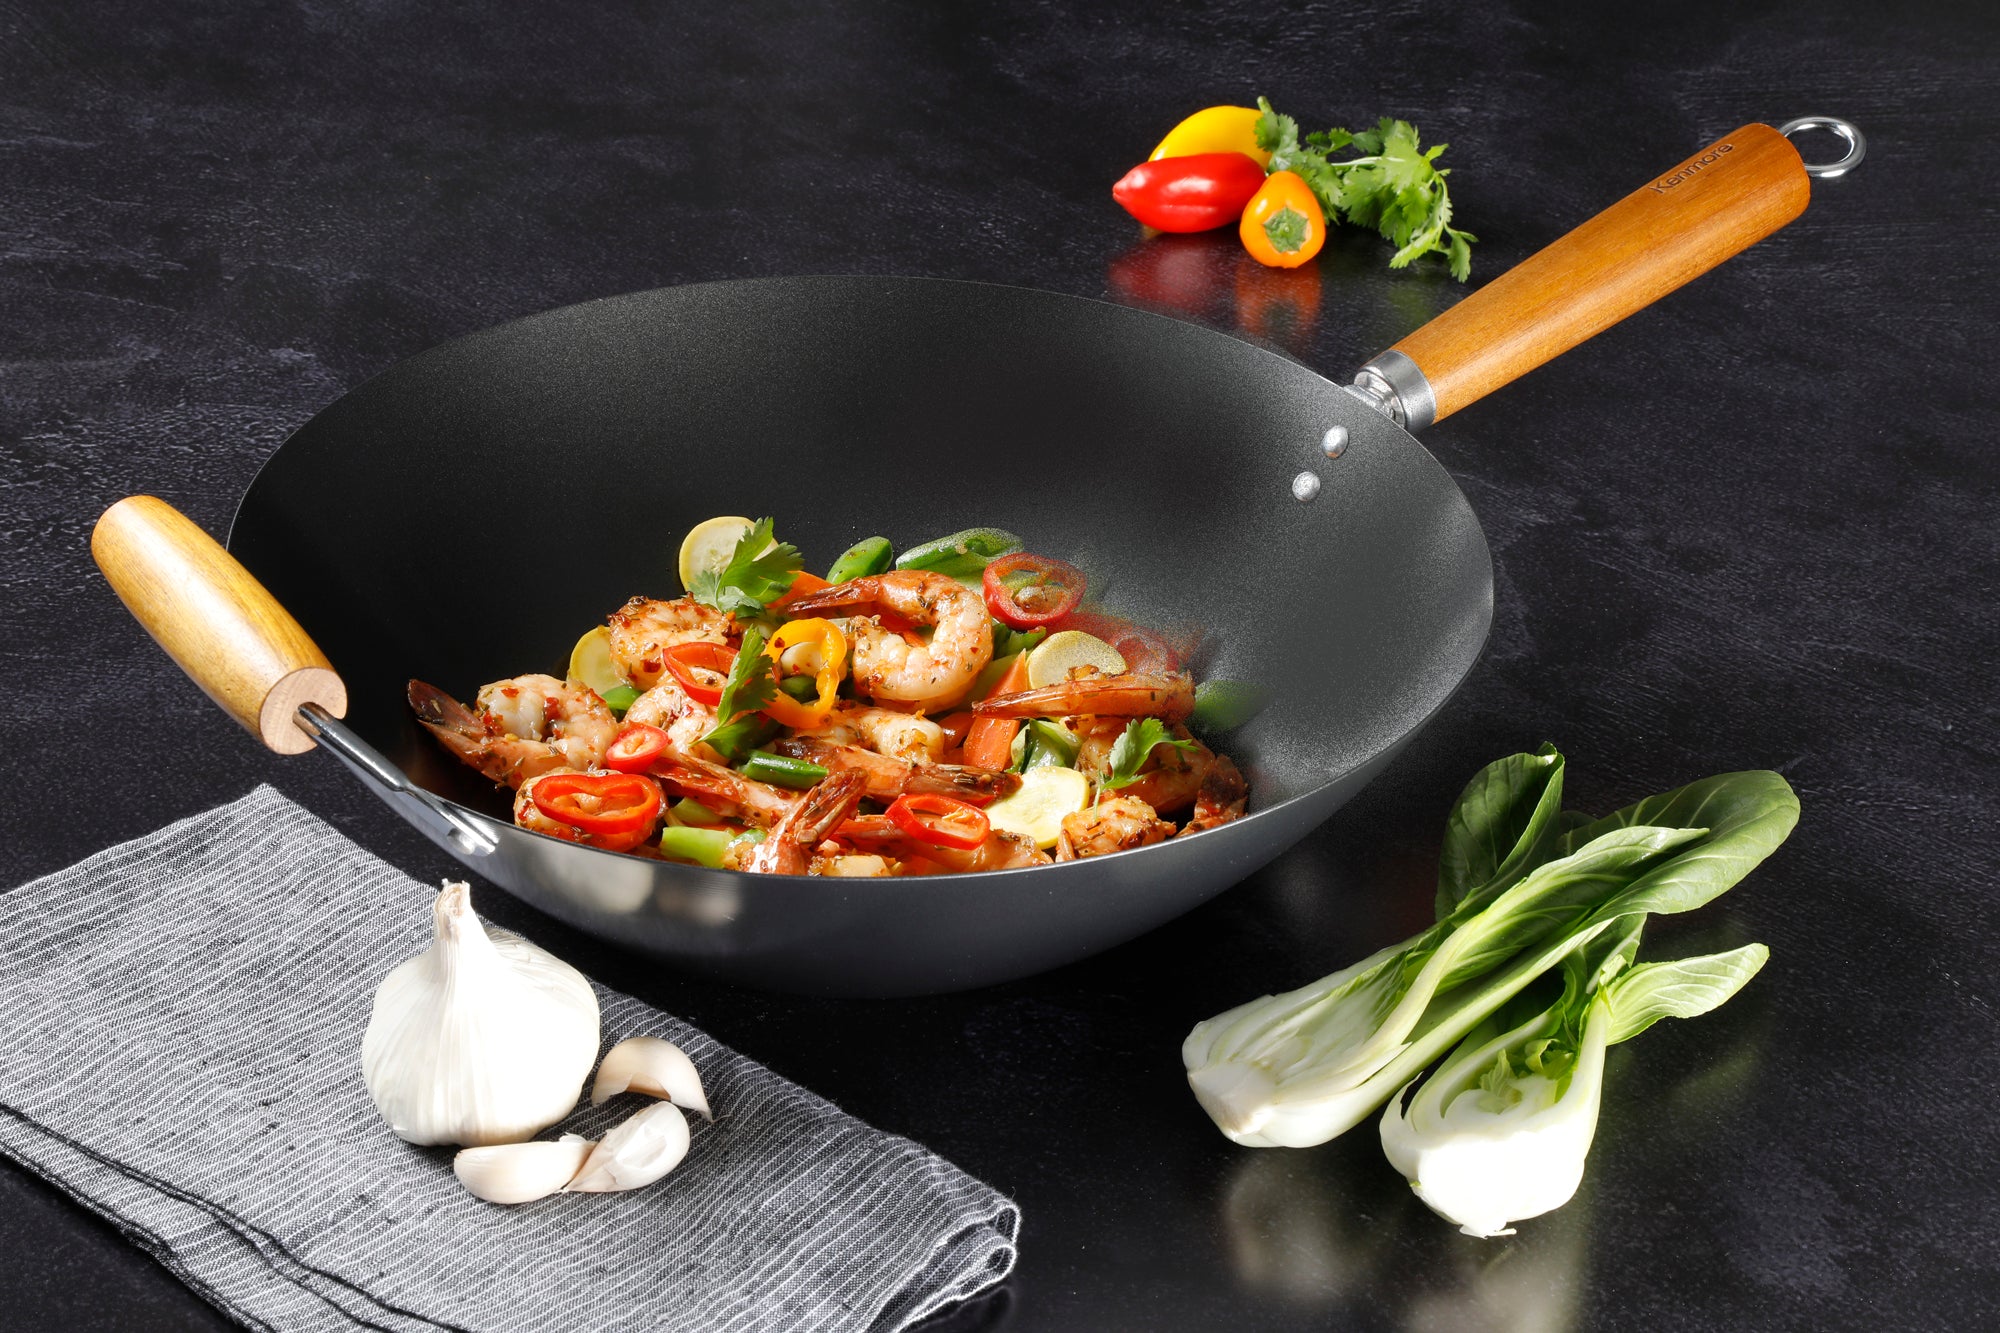 frök All-in-One Platinum Non-Stick Fry Pan Meets Wok with Lid, 11-Inch, Blush & Rose Gold